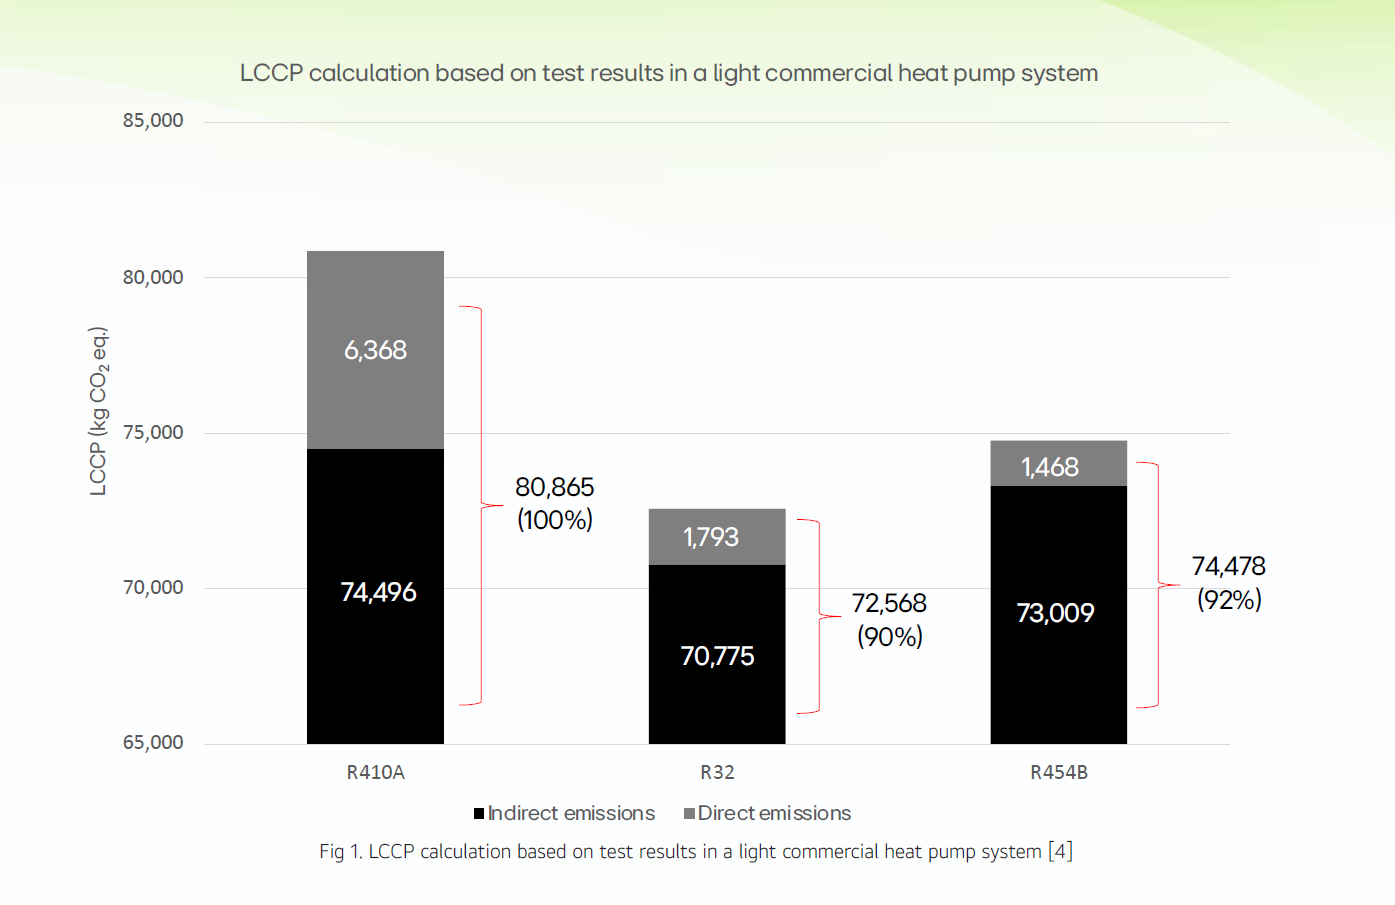 LCCP calculation based on test results in a light commercial heat pump system